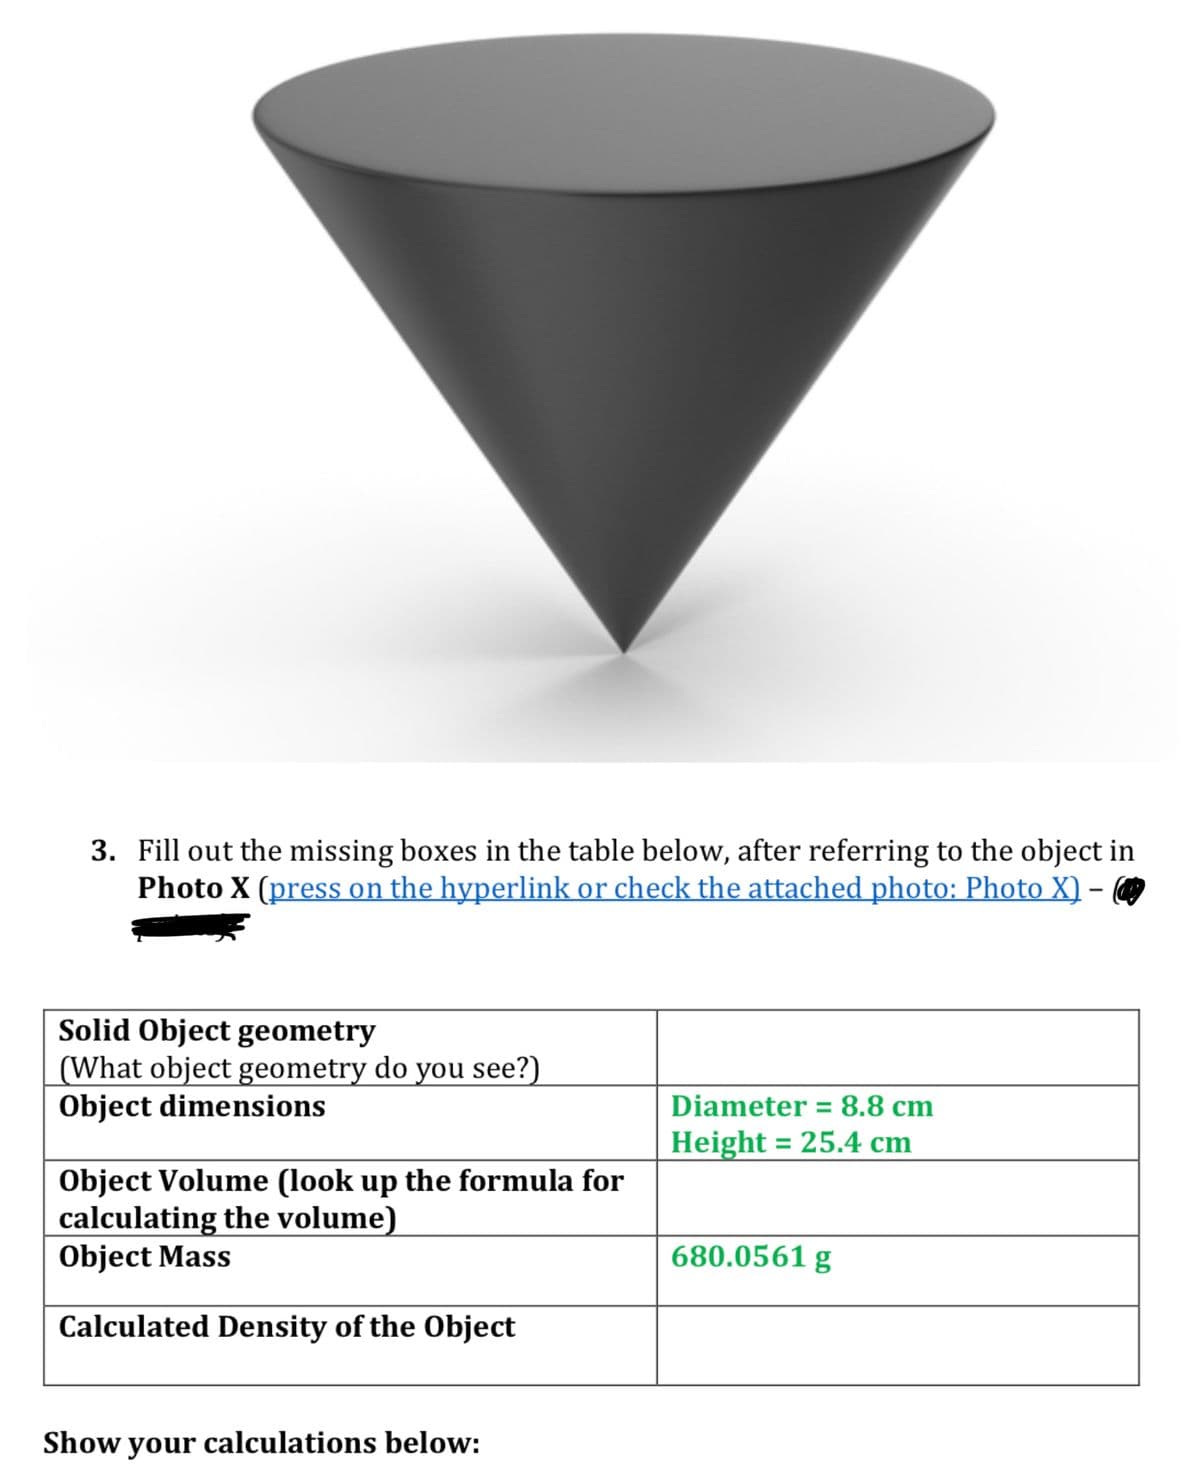 3. Fill out the missing boxes in the table below, after referring to the object in
Photo X (press on the hyperlink or check the attached photo: Photo X) -
Solid Object geometry
(What object geometry do you see?)
Object dimensions
Object Volume (look up the formula for
calculating the volume)
Object Mass
Calculated Density of the Object
Show your calculations below:
Diameter = 8.8 cm
Height = 25.4 cm
680.0561 g